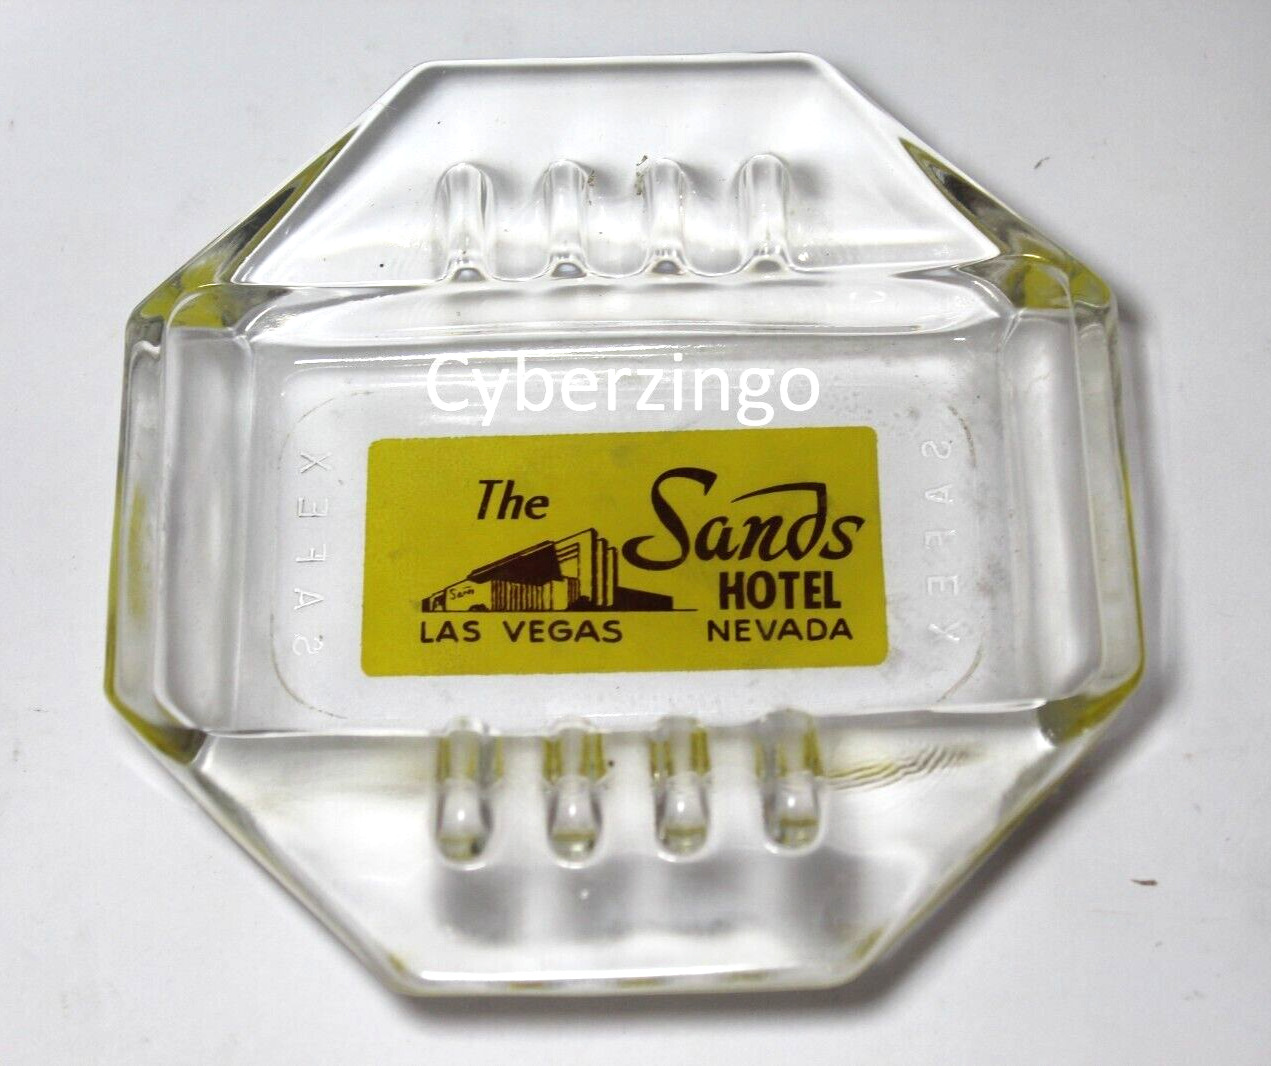 The Sands Hotel Las Vegas Nevada Vintage Glass Ashtray PREOWNED